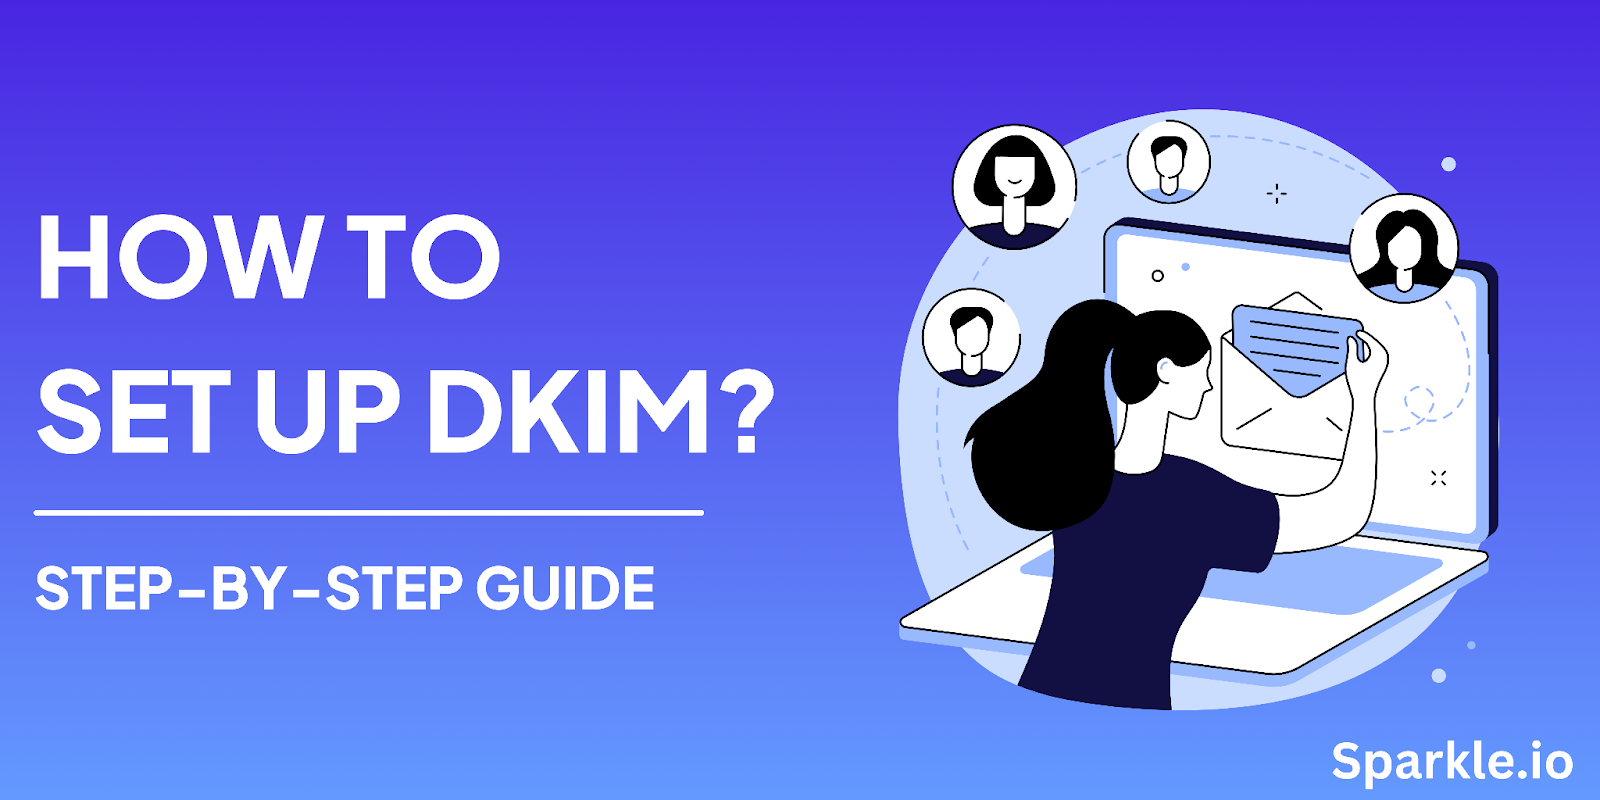 How to set up DKIM? Step-by-step guide
